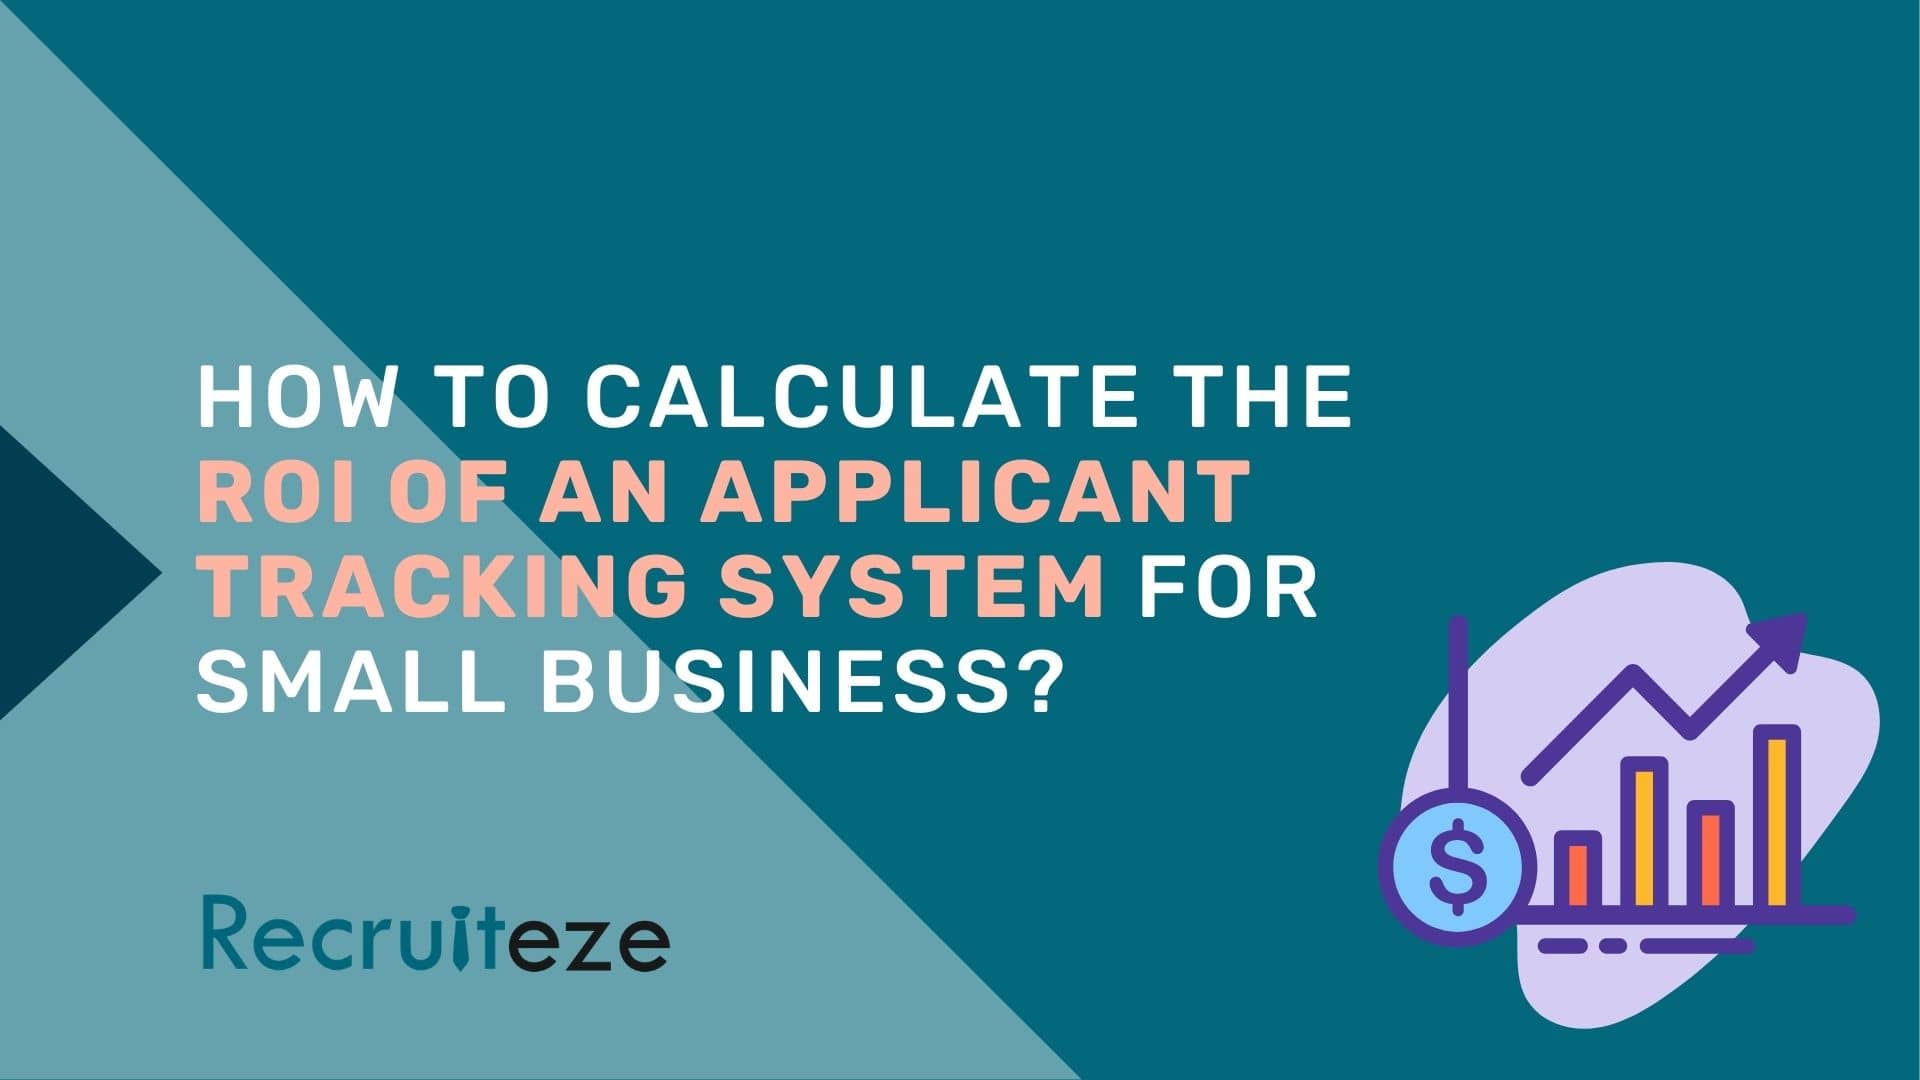 How to Calculate the ROI of an Applicant Tracking System For Small Business?